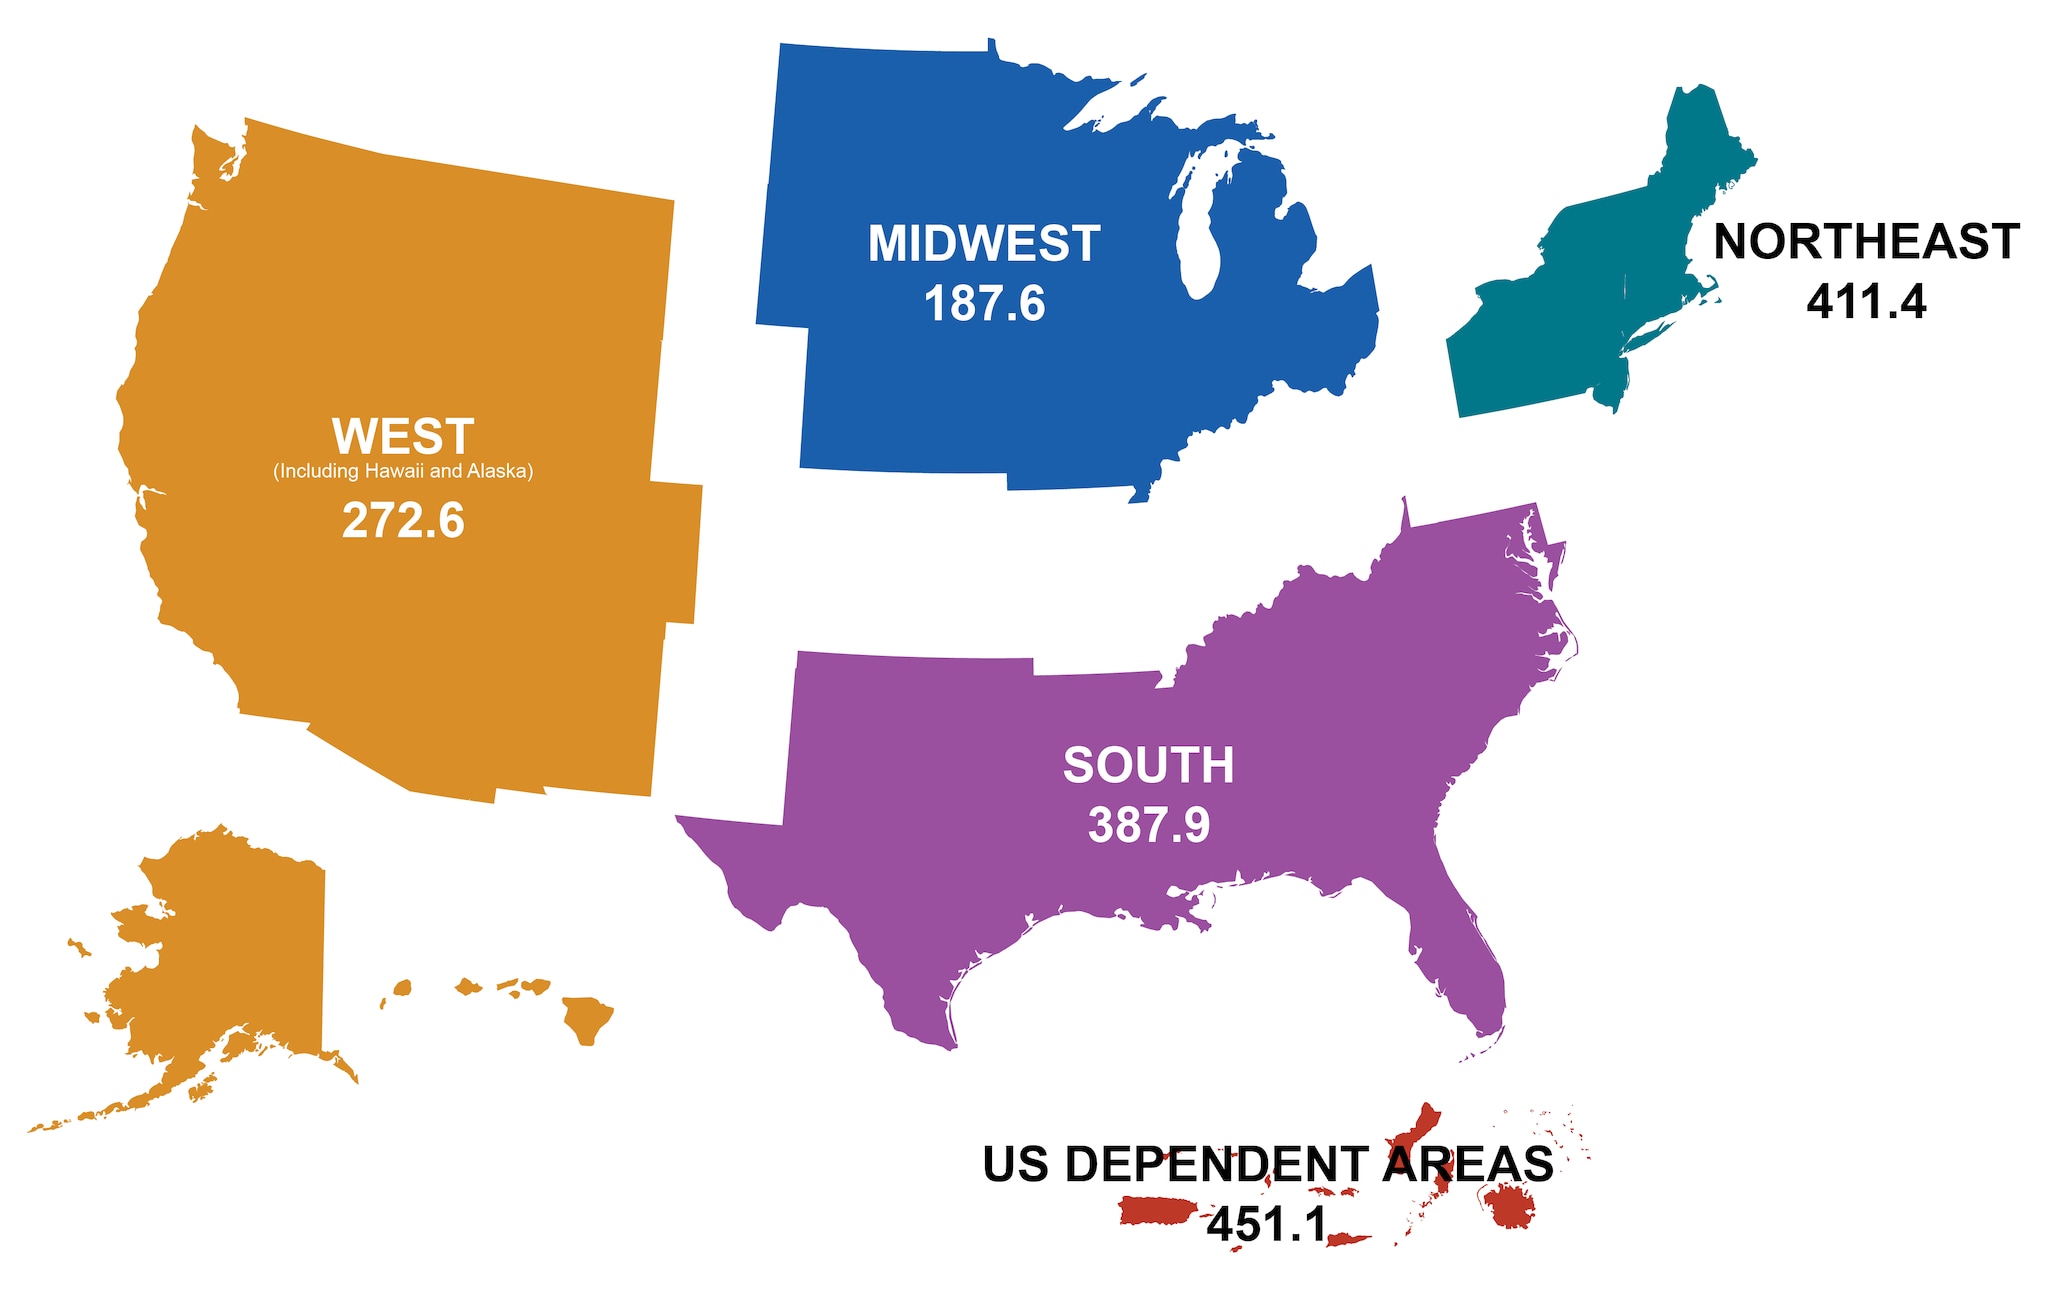 This map shows the rates of people with diagnosed HIV in the US and dependent areas by region.